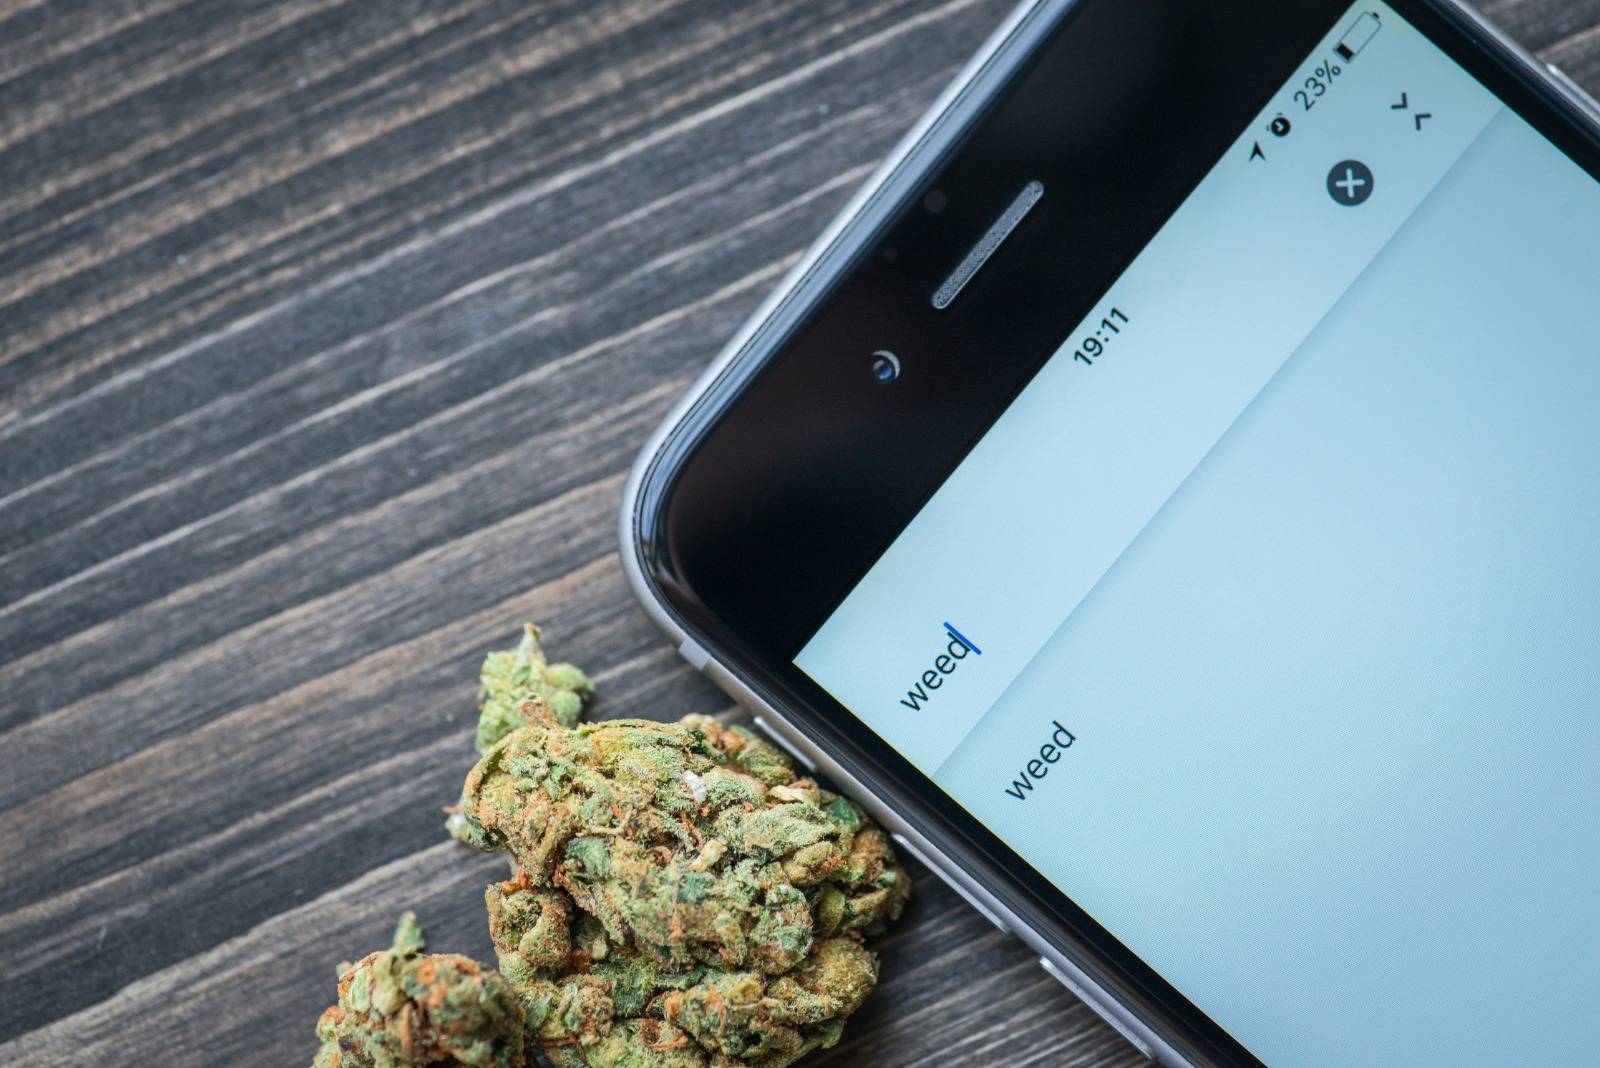 Phone and weed to order Vancouver weed delivery. Speed Greens